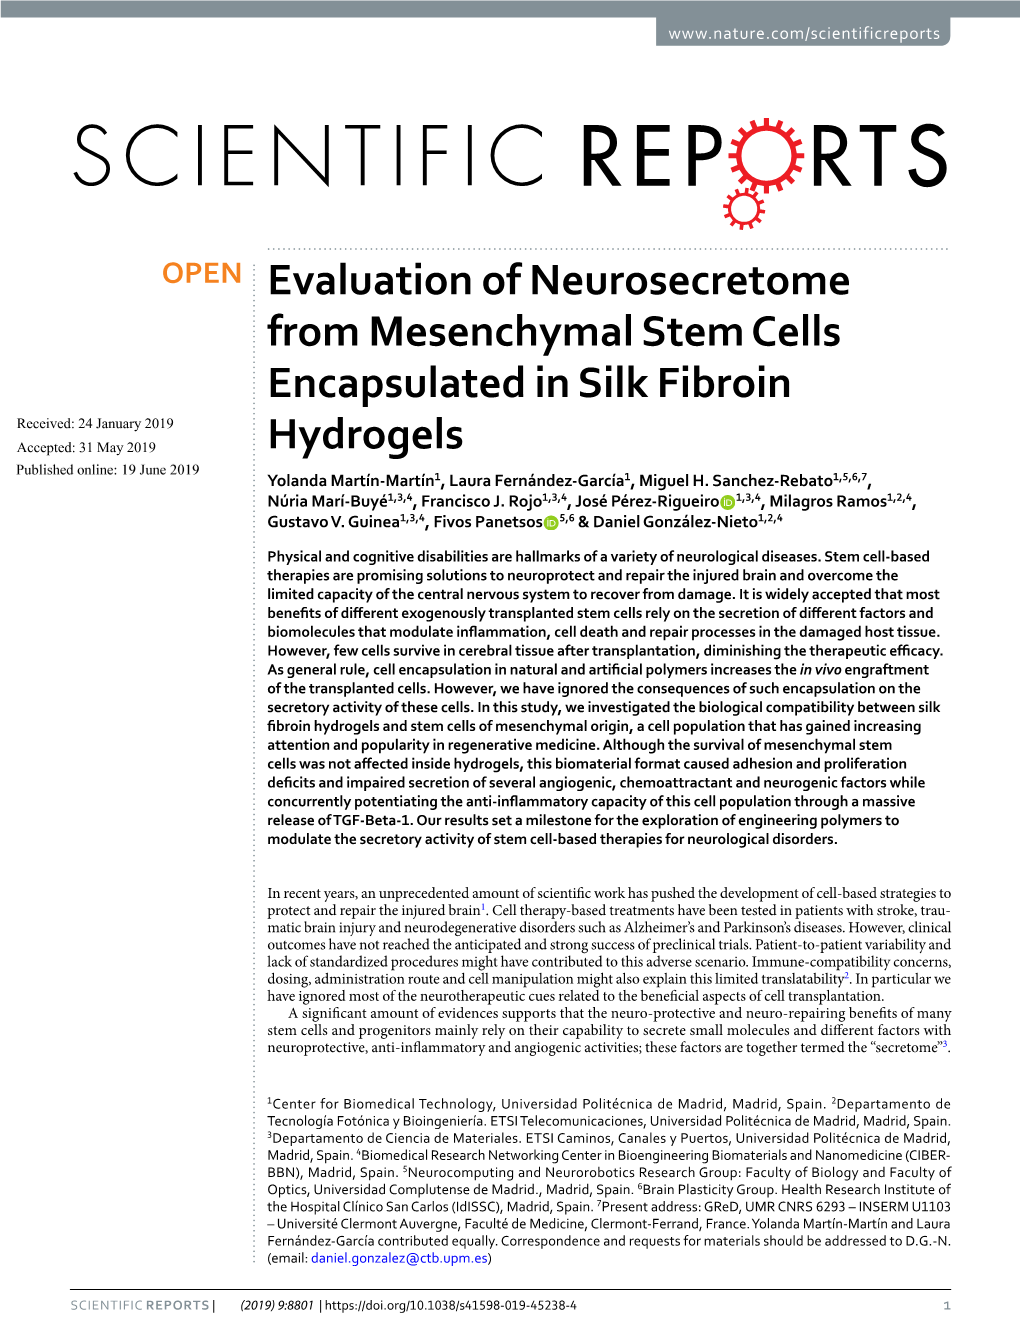 Evaluation of Neurosecretome from Mesenchymal Stem Cells Encapsulated in Silk Fibroin Hydrogels